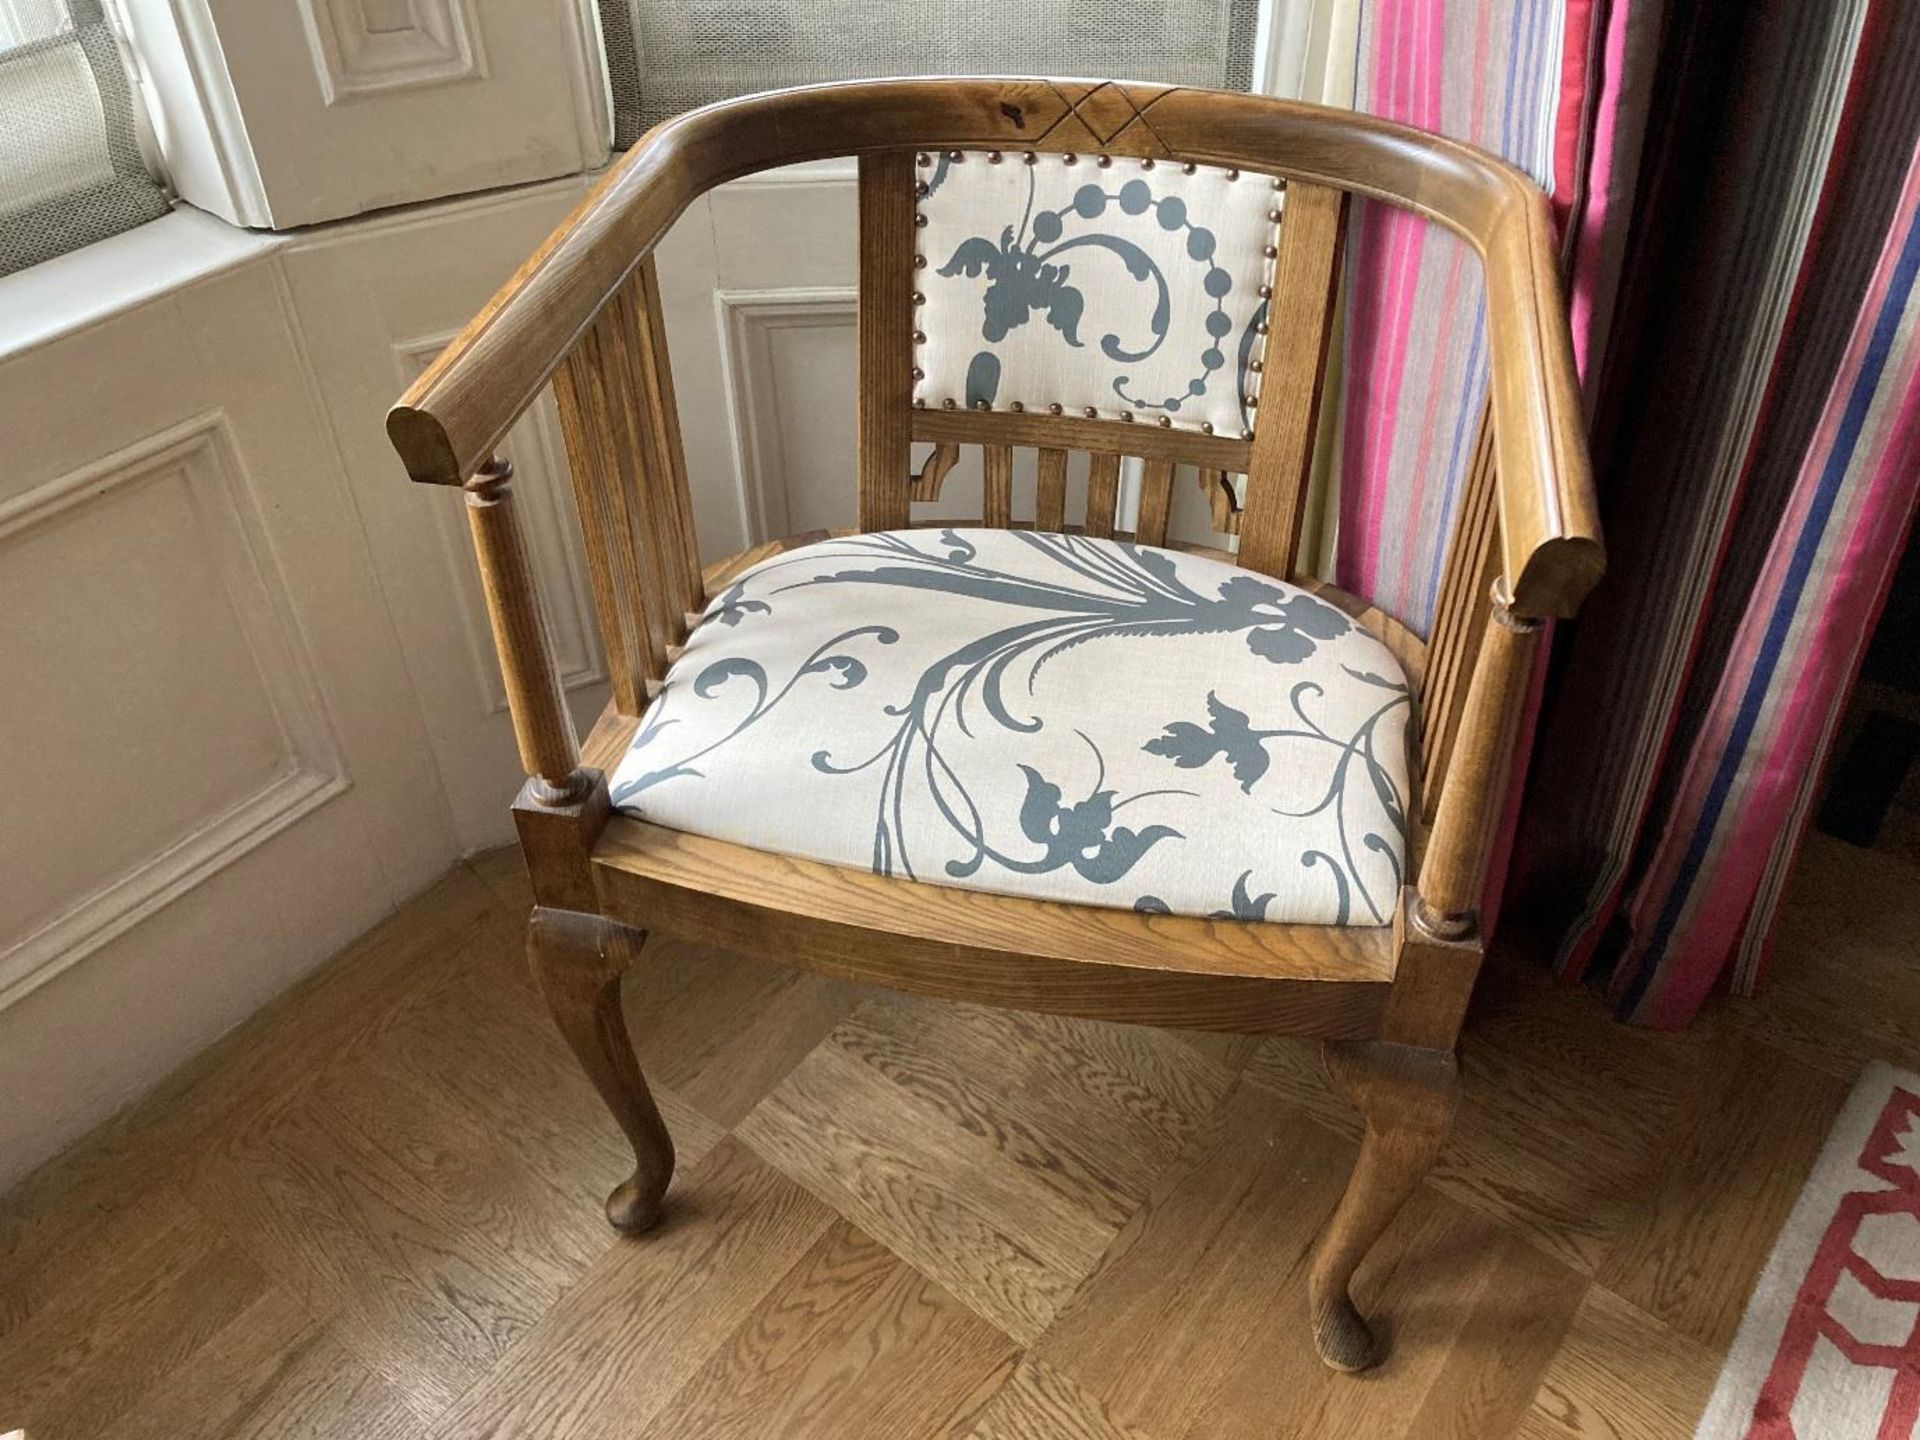 George Smith Furniture and Fabrics Upholstered wooden 19th century American chair with inlaid